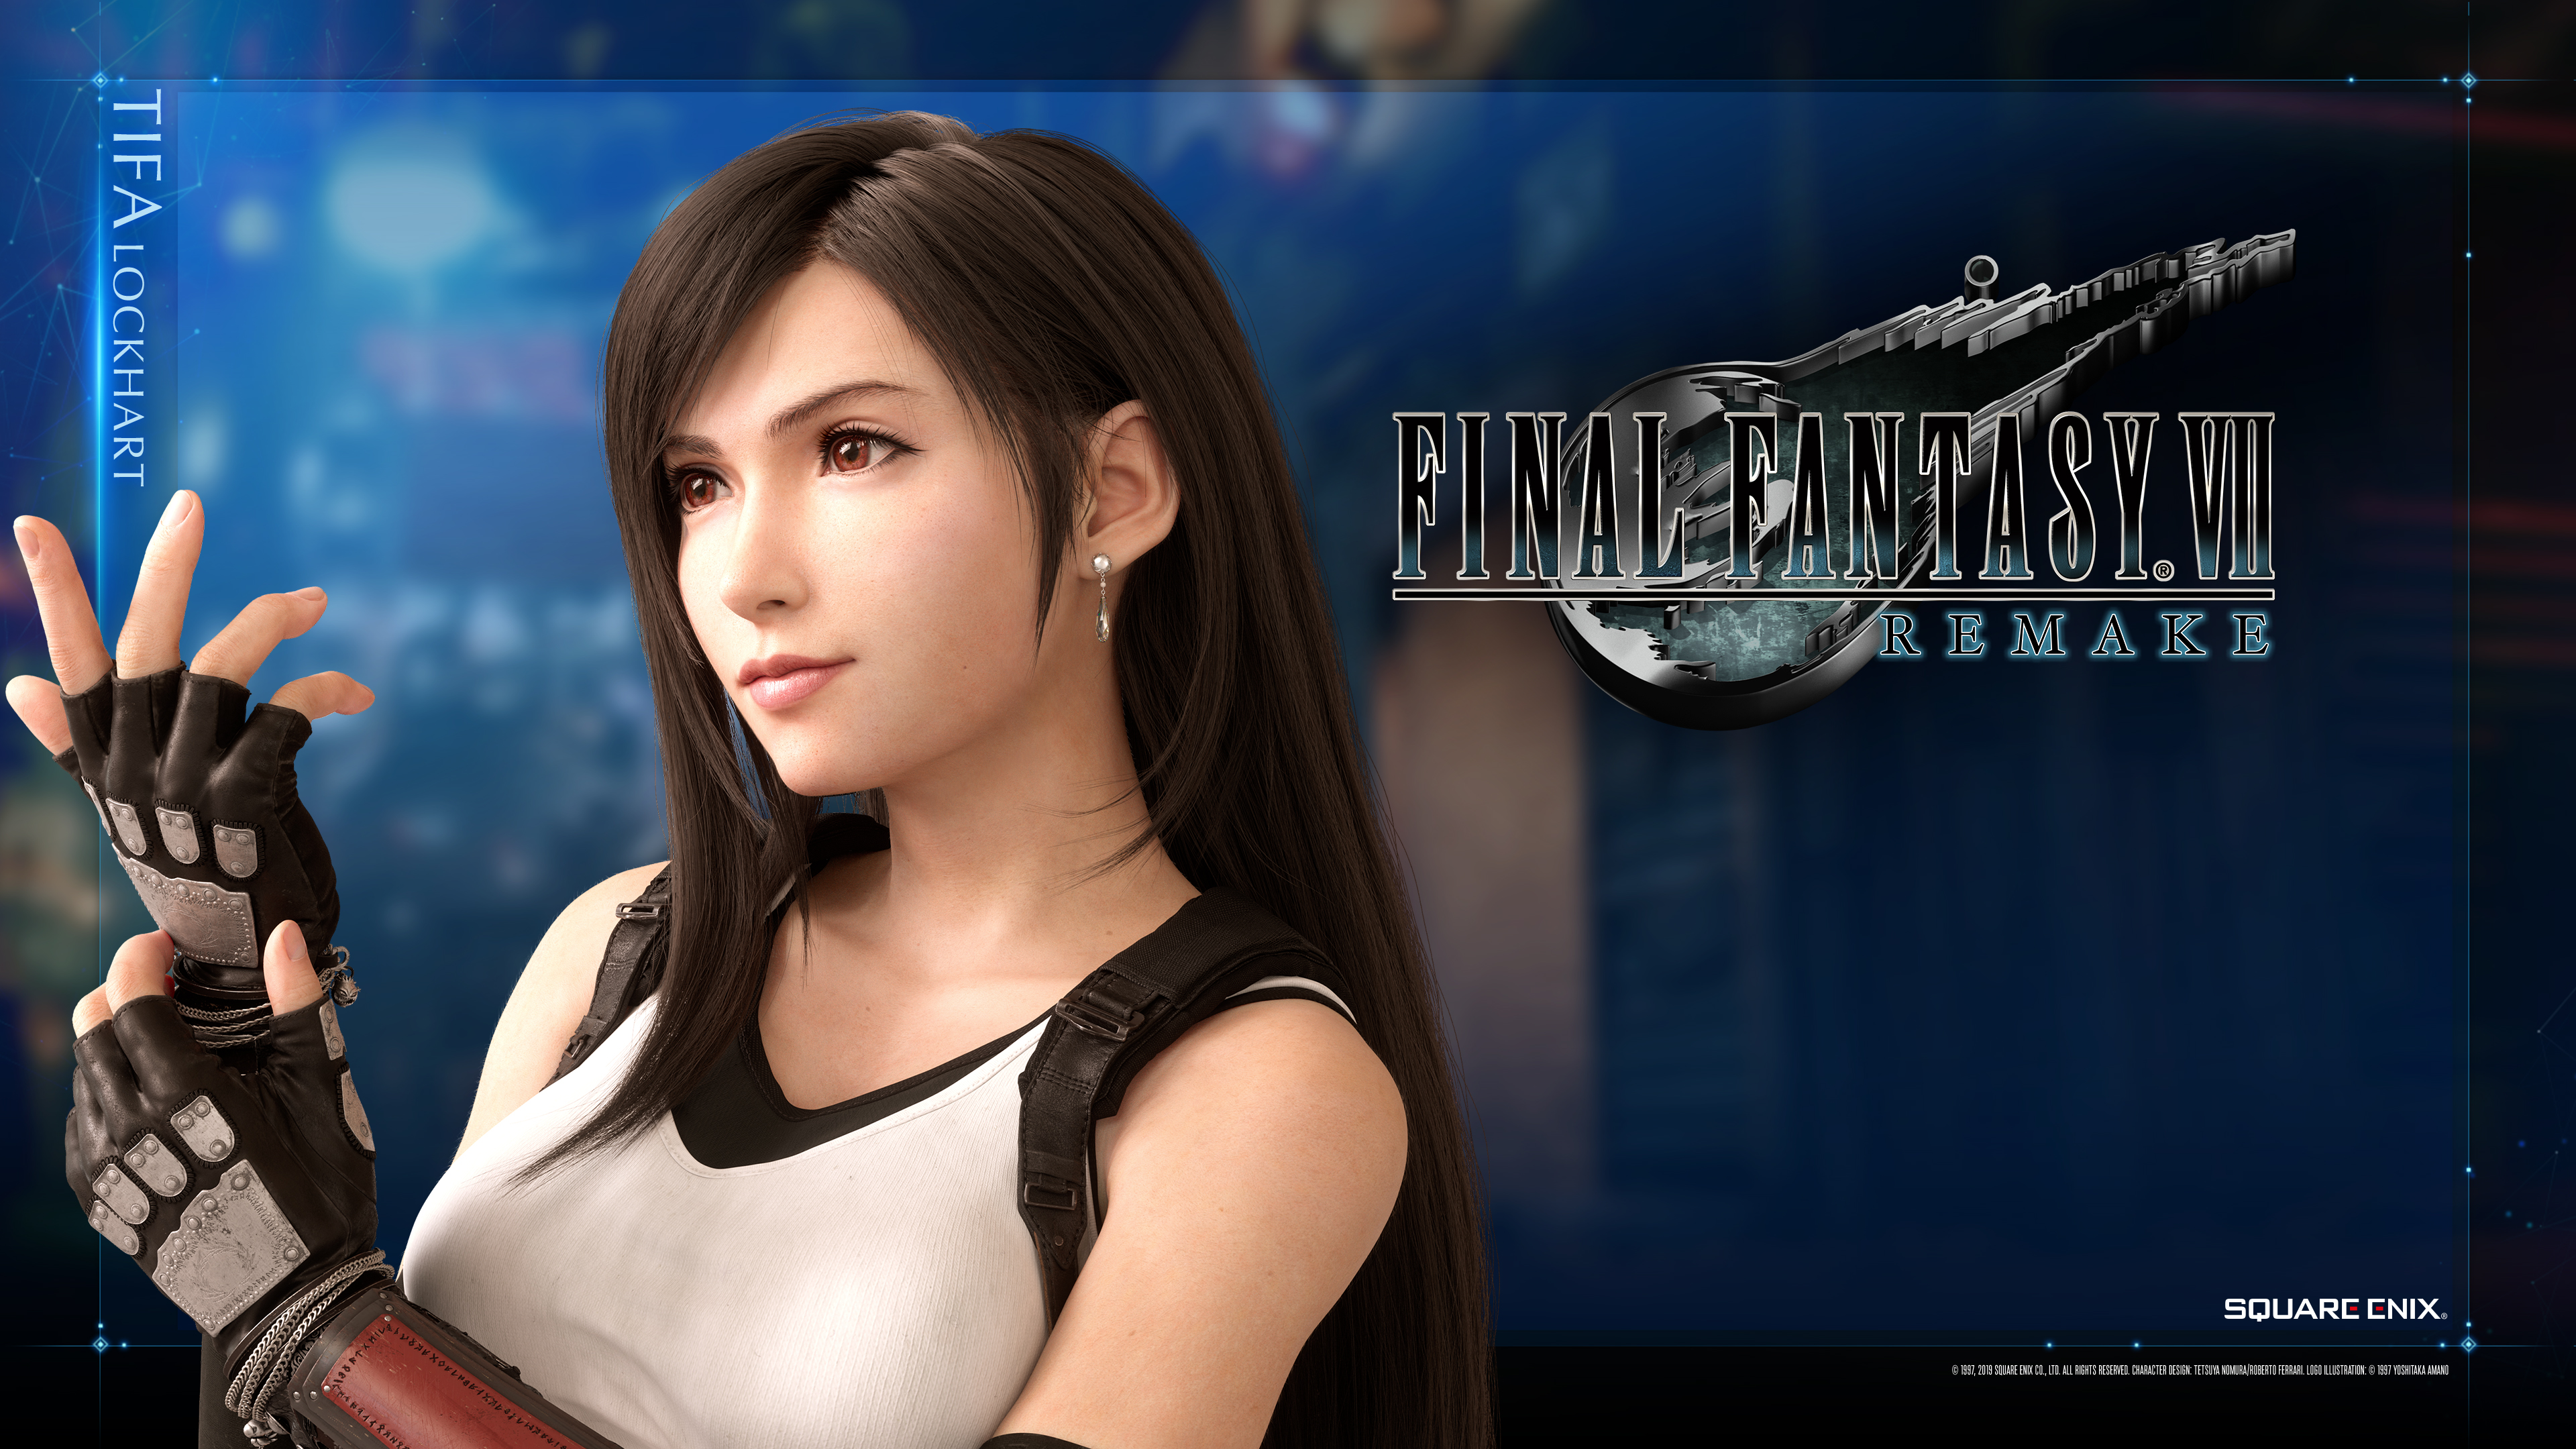 100+ Tifa Lockhart HD Wallpapers and Backgrounds